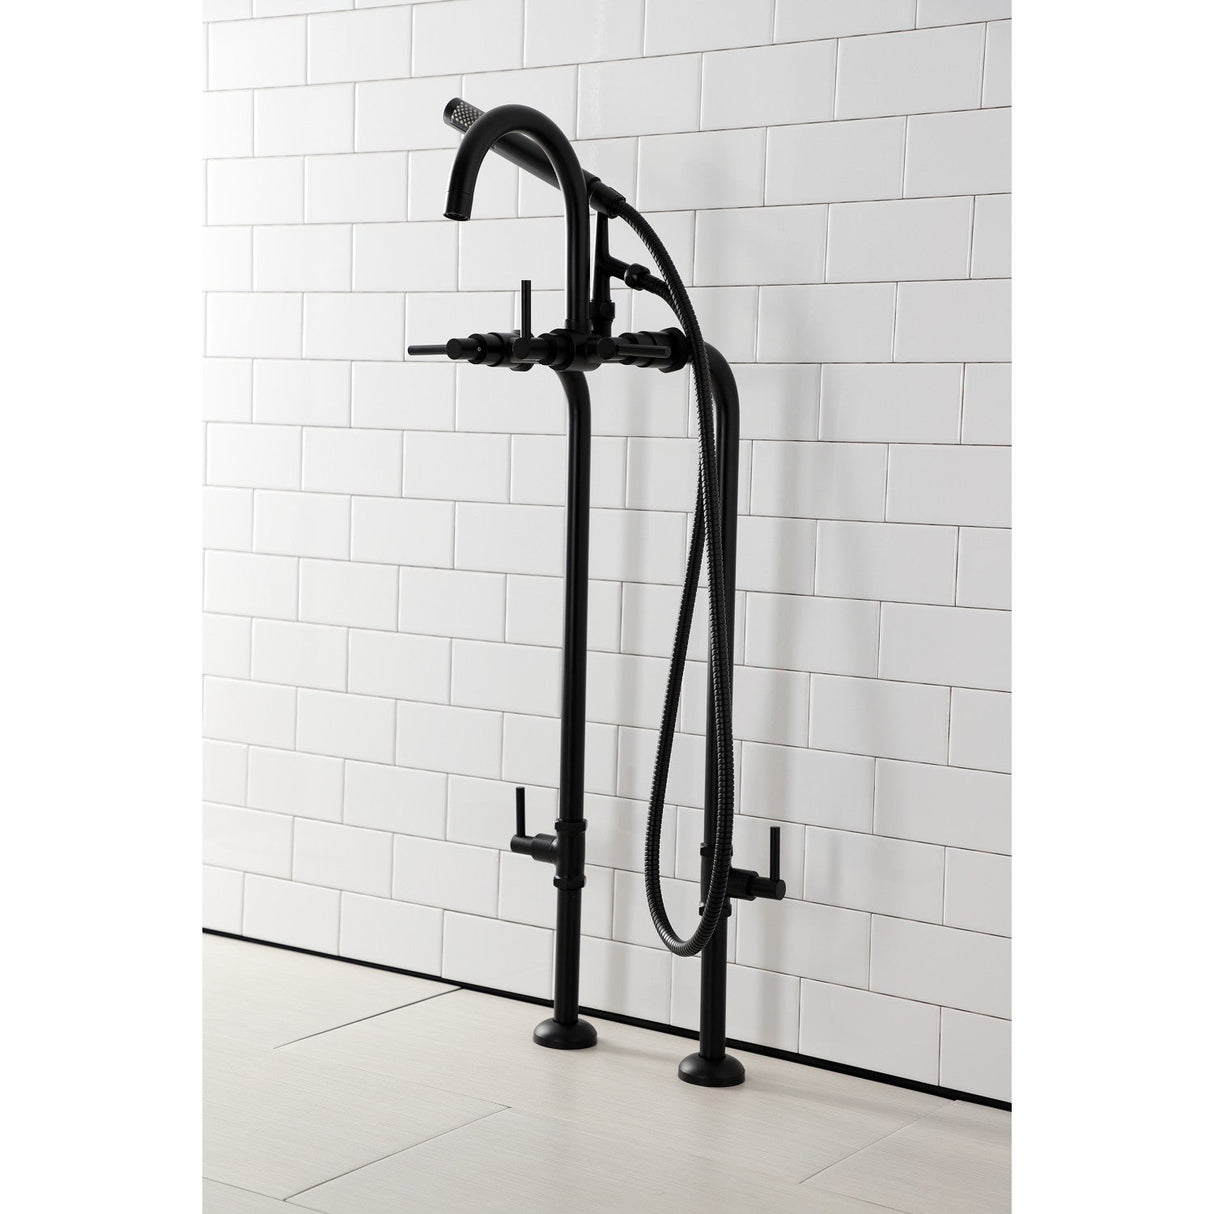 Concord CCK8100DL Freestanding Tub Faucet with Supply Line and Stop Valve, Matte Black